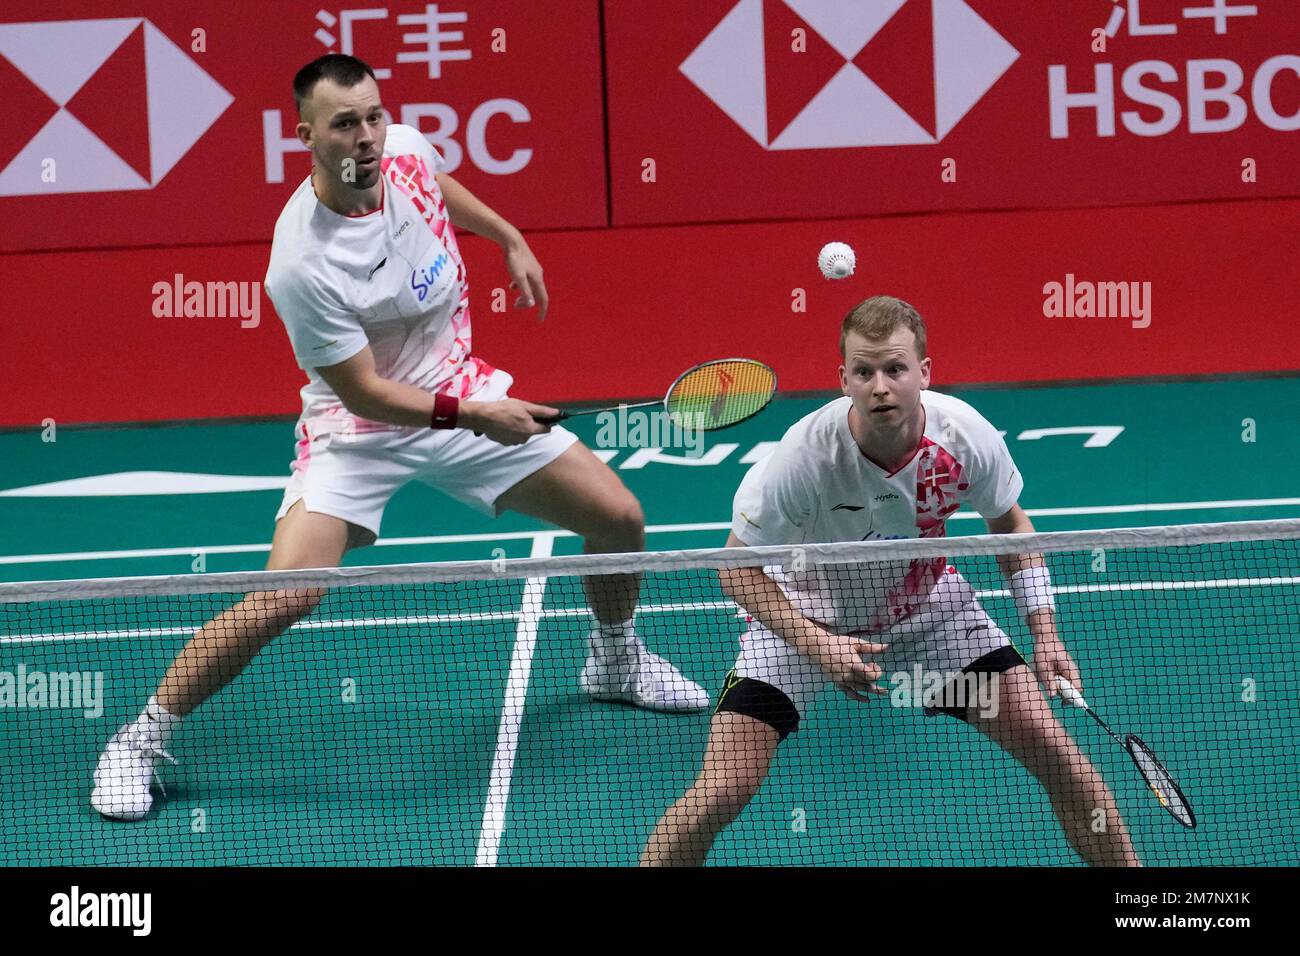 Denmarks Anders Skaarup Rasmussen, left, and Kim Astrup compete against Chinas Liu Yu Chen, and Ou Xuan Yi during their mens doubles Group A badminton match at the BWF World Tour Finals